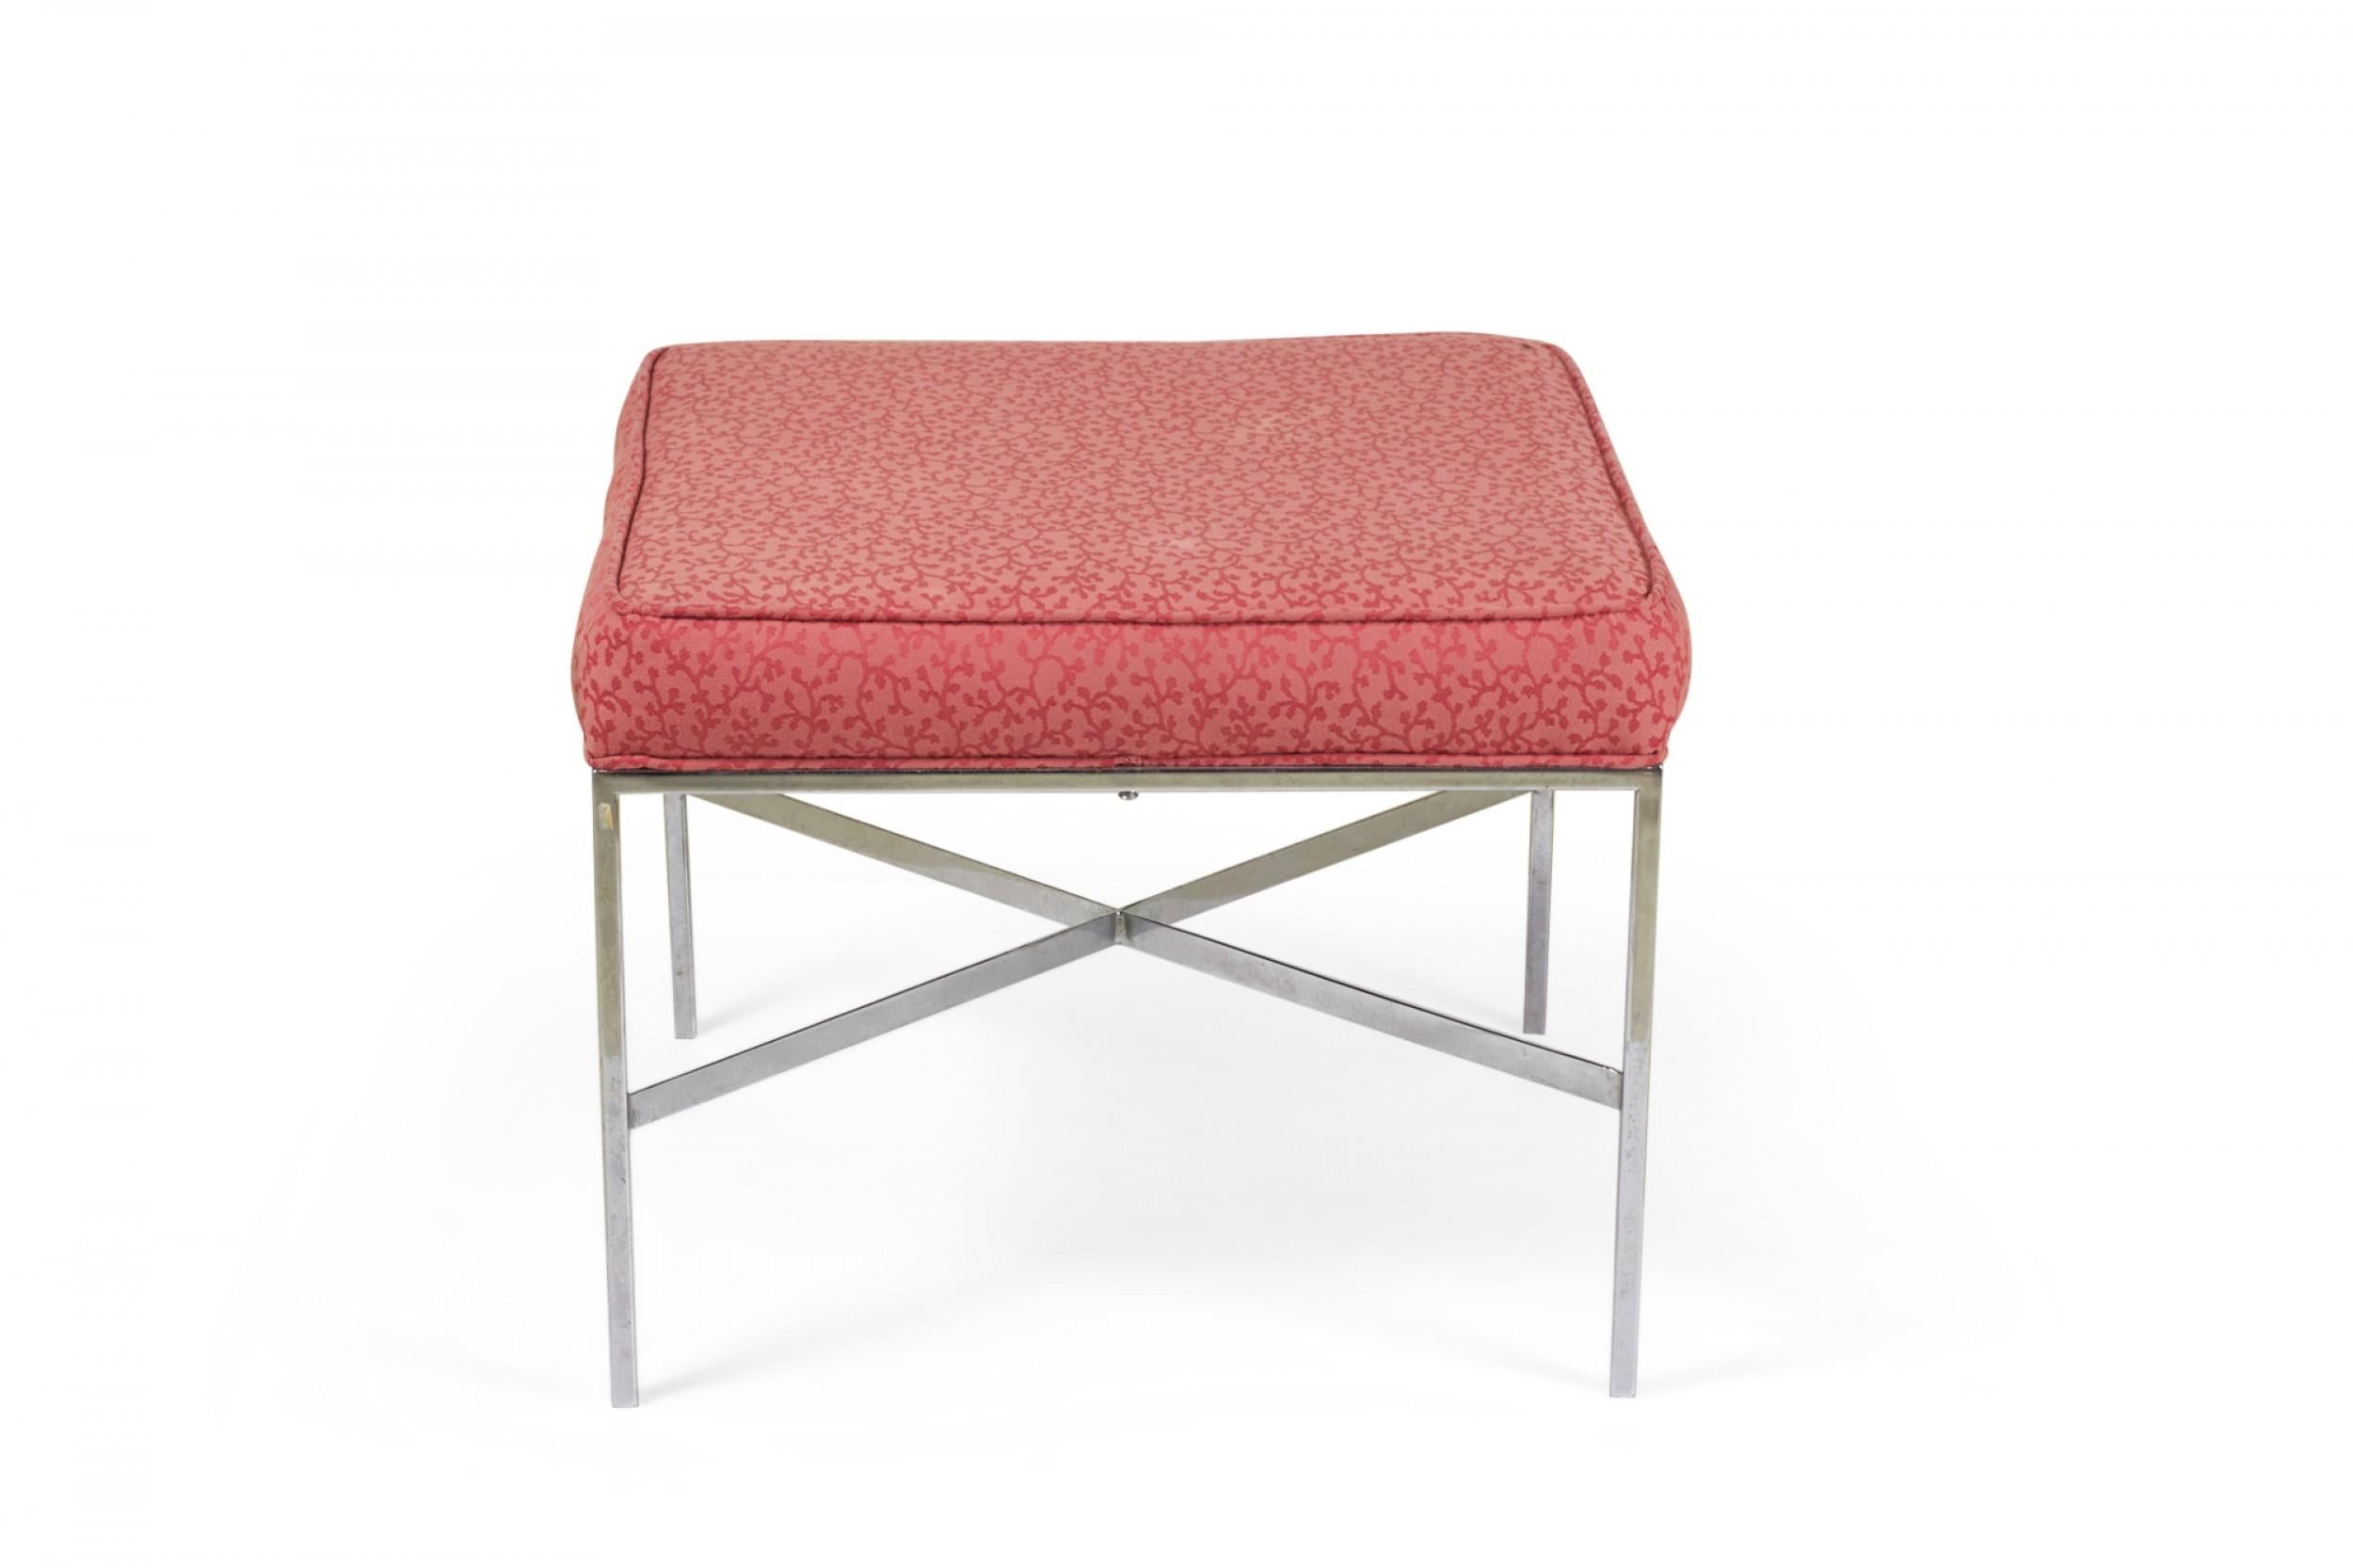 Modern Design Institute of Chrome and Raspberry Upholstery Square Bench For Sale